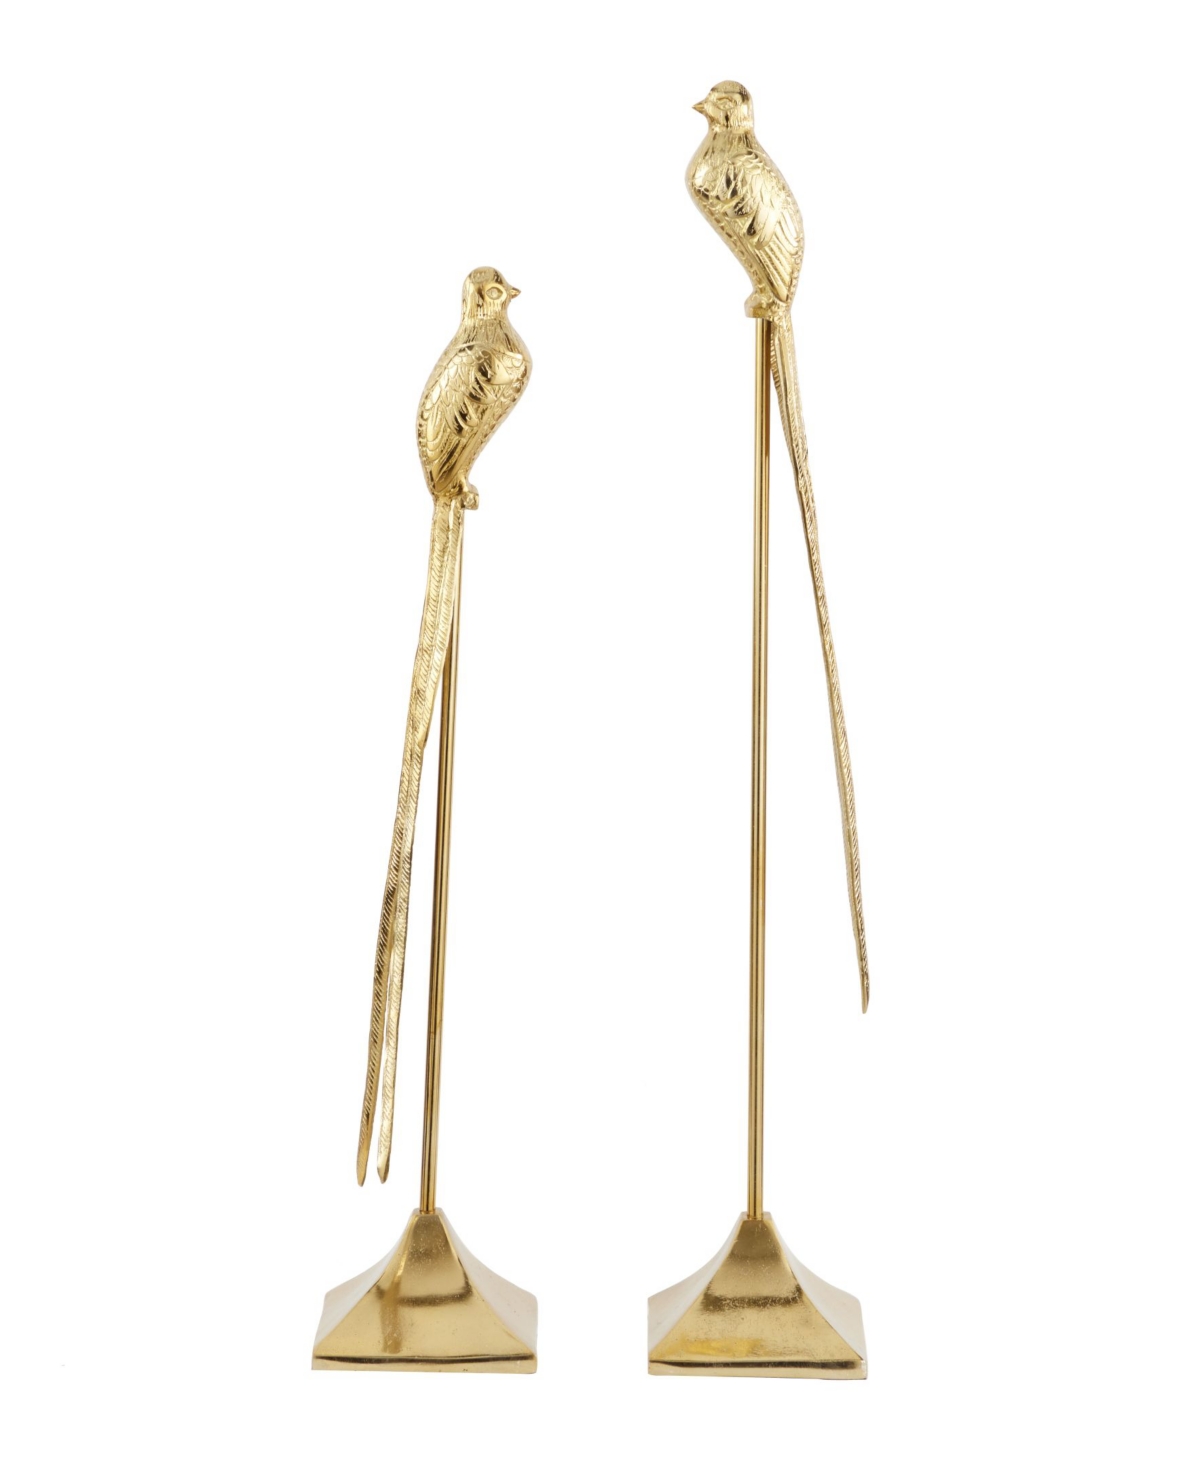 Rosemary Lane Eclectic Bird Sculpture, Set Of 2 In Gold-tone